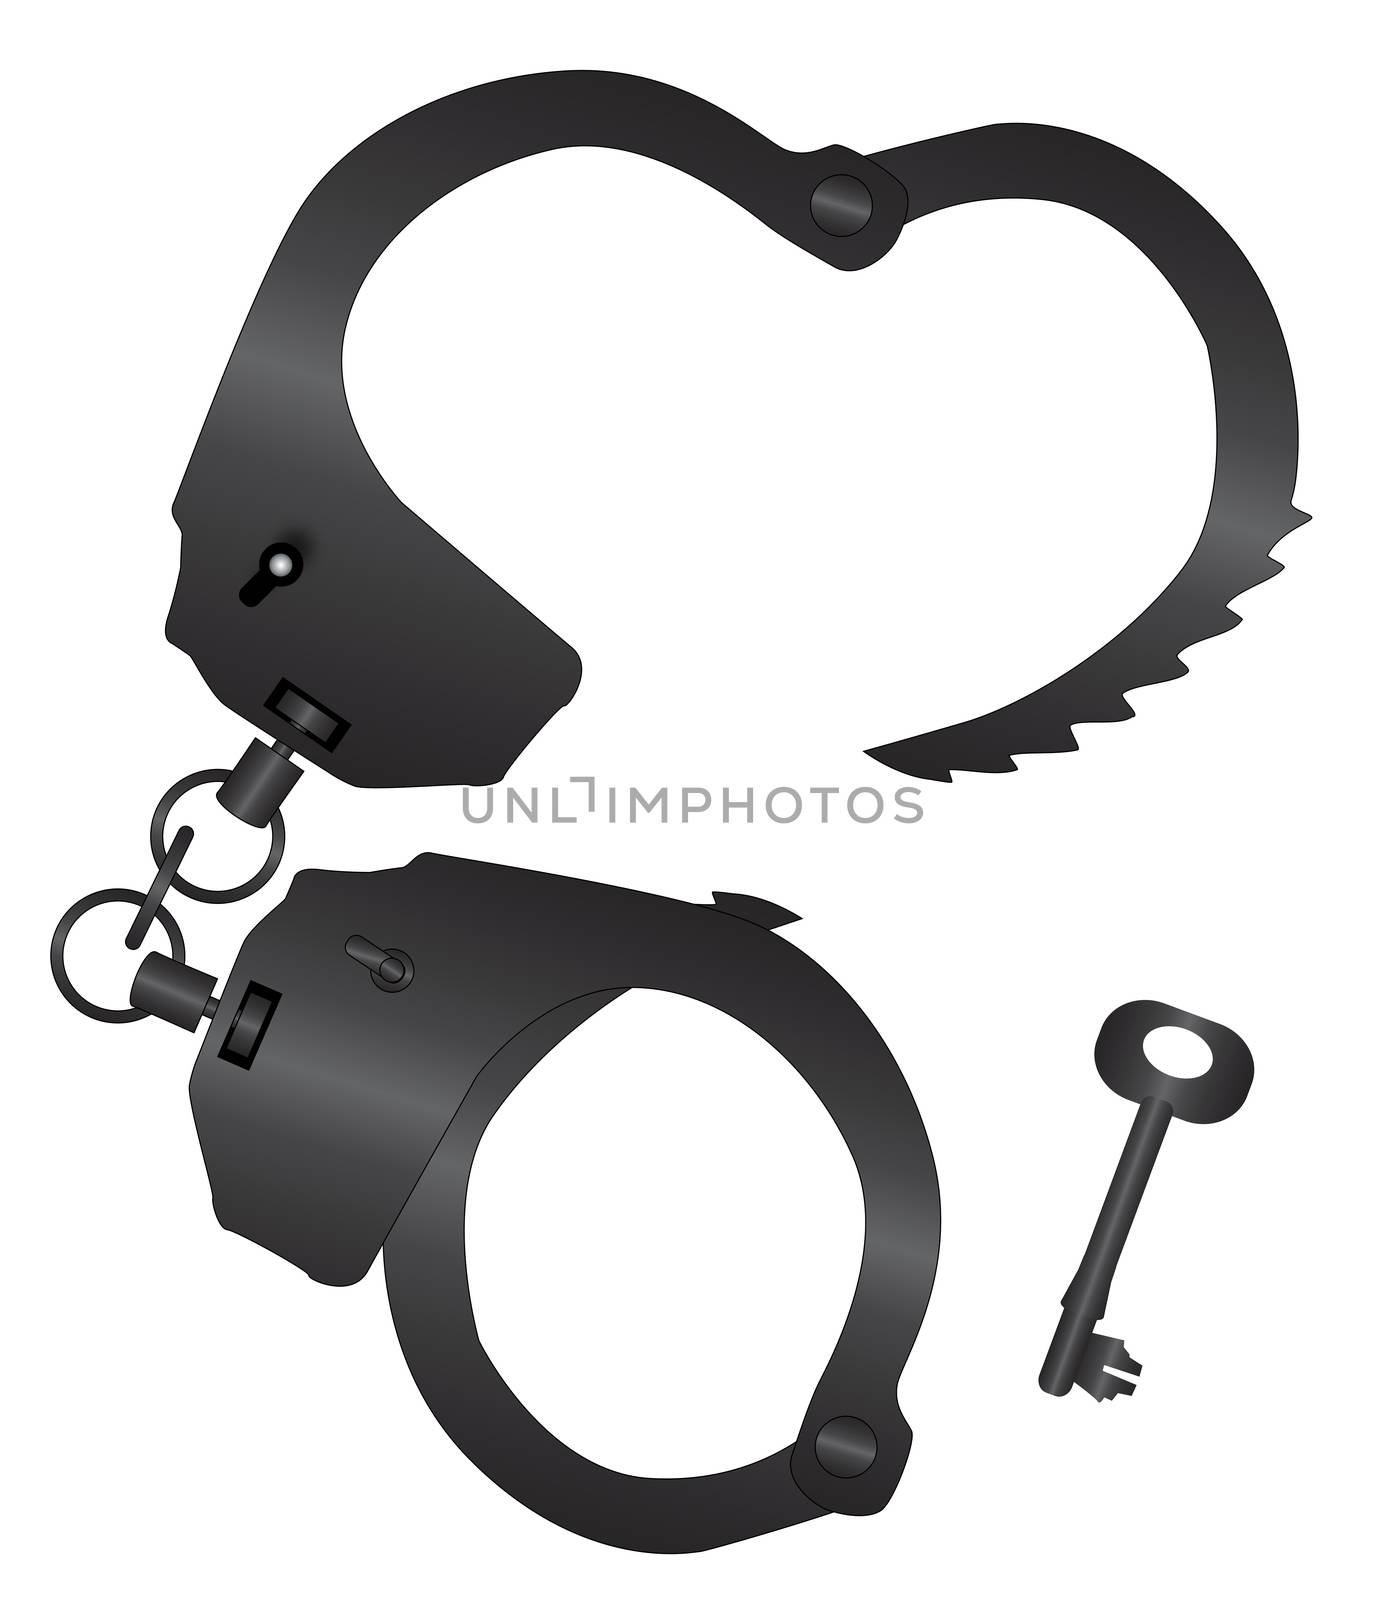 A set of metal handcuffs with a key